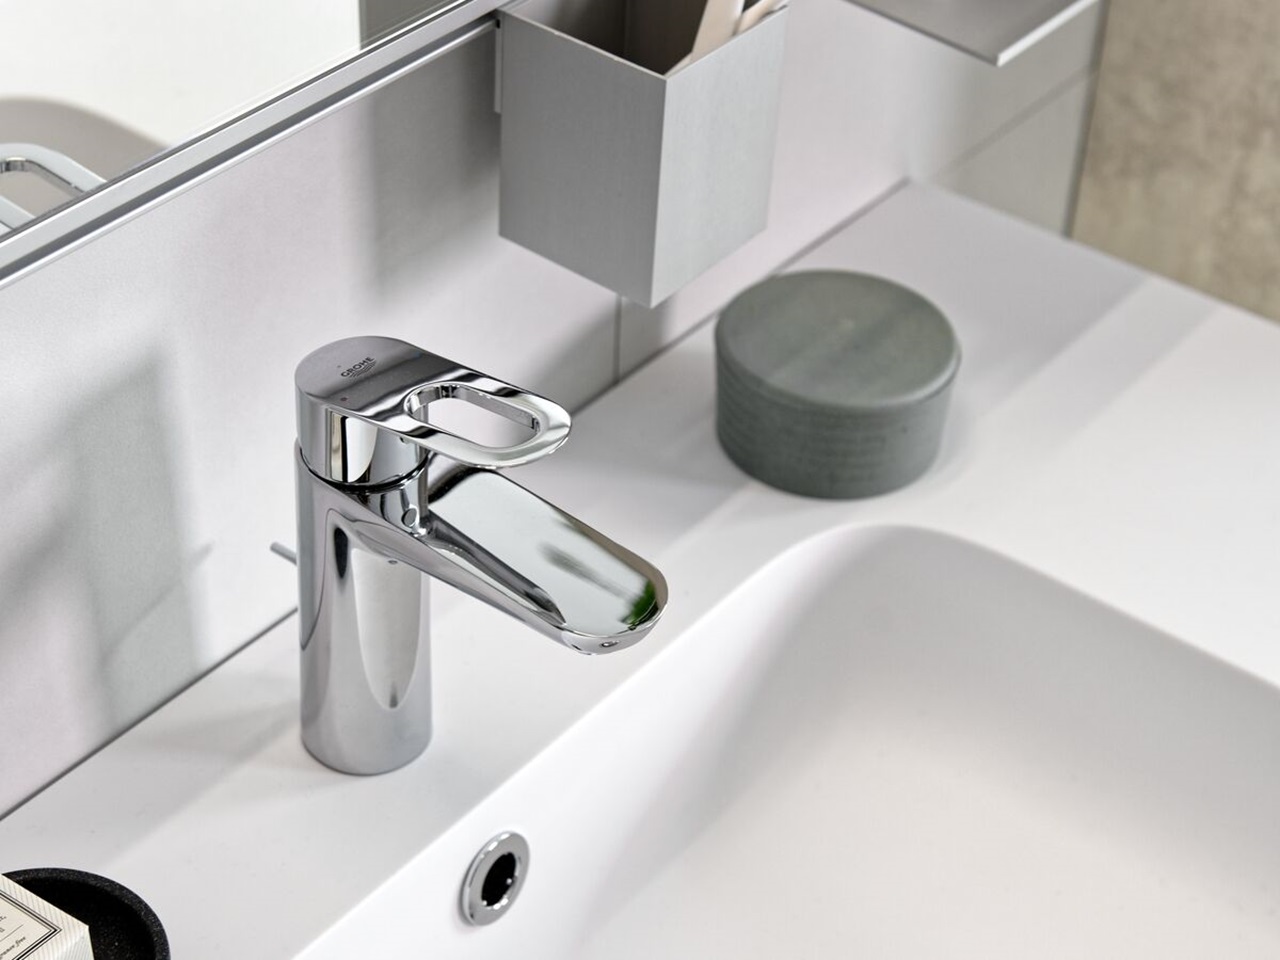 Matt white bathroom counter top with built-in basin and chrome mixer tap